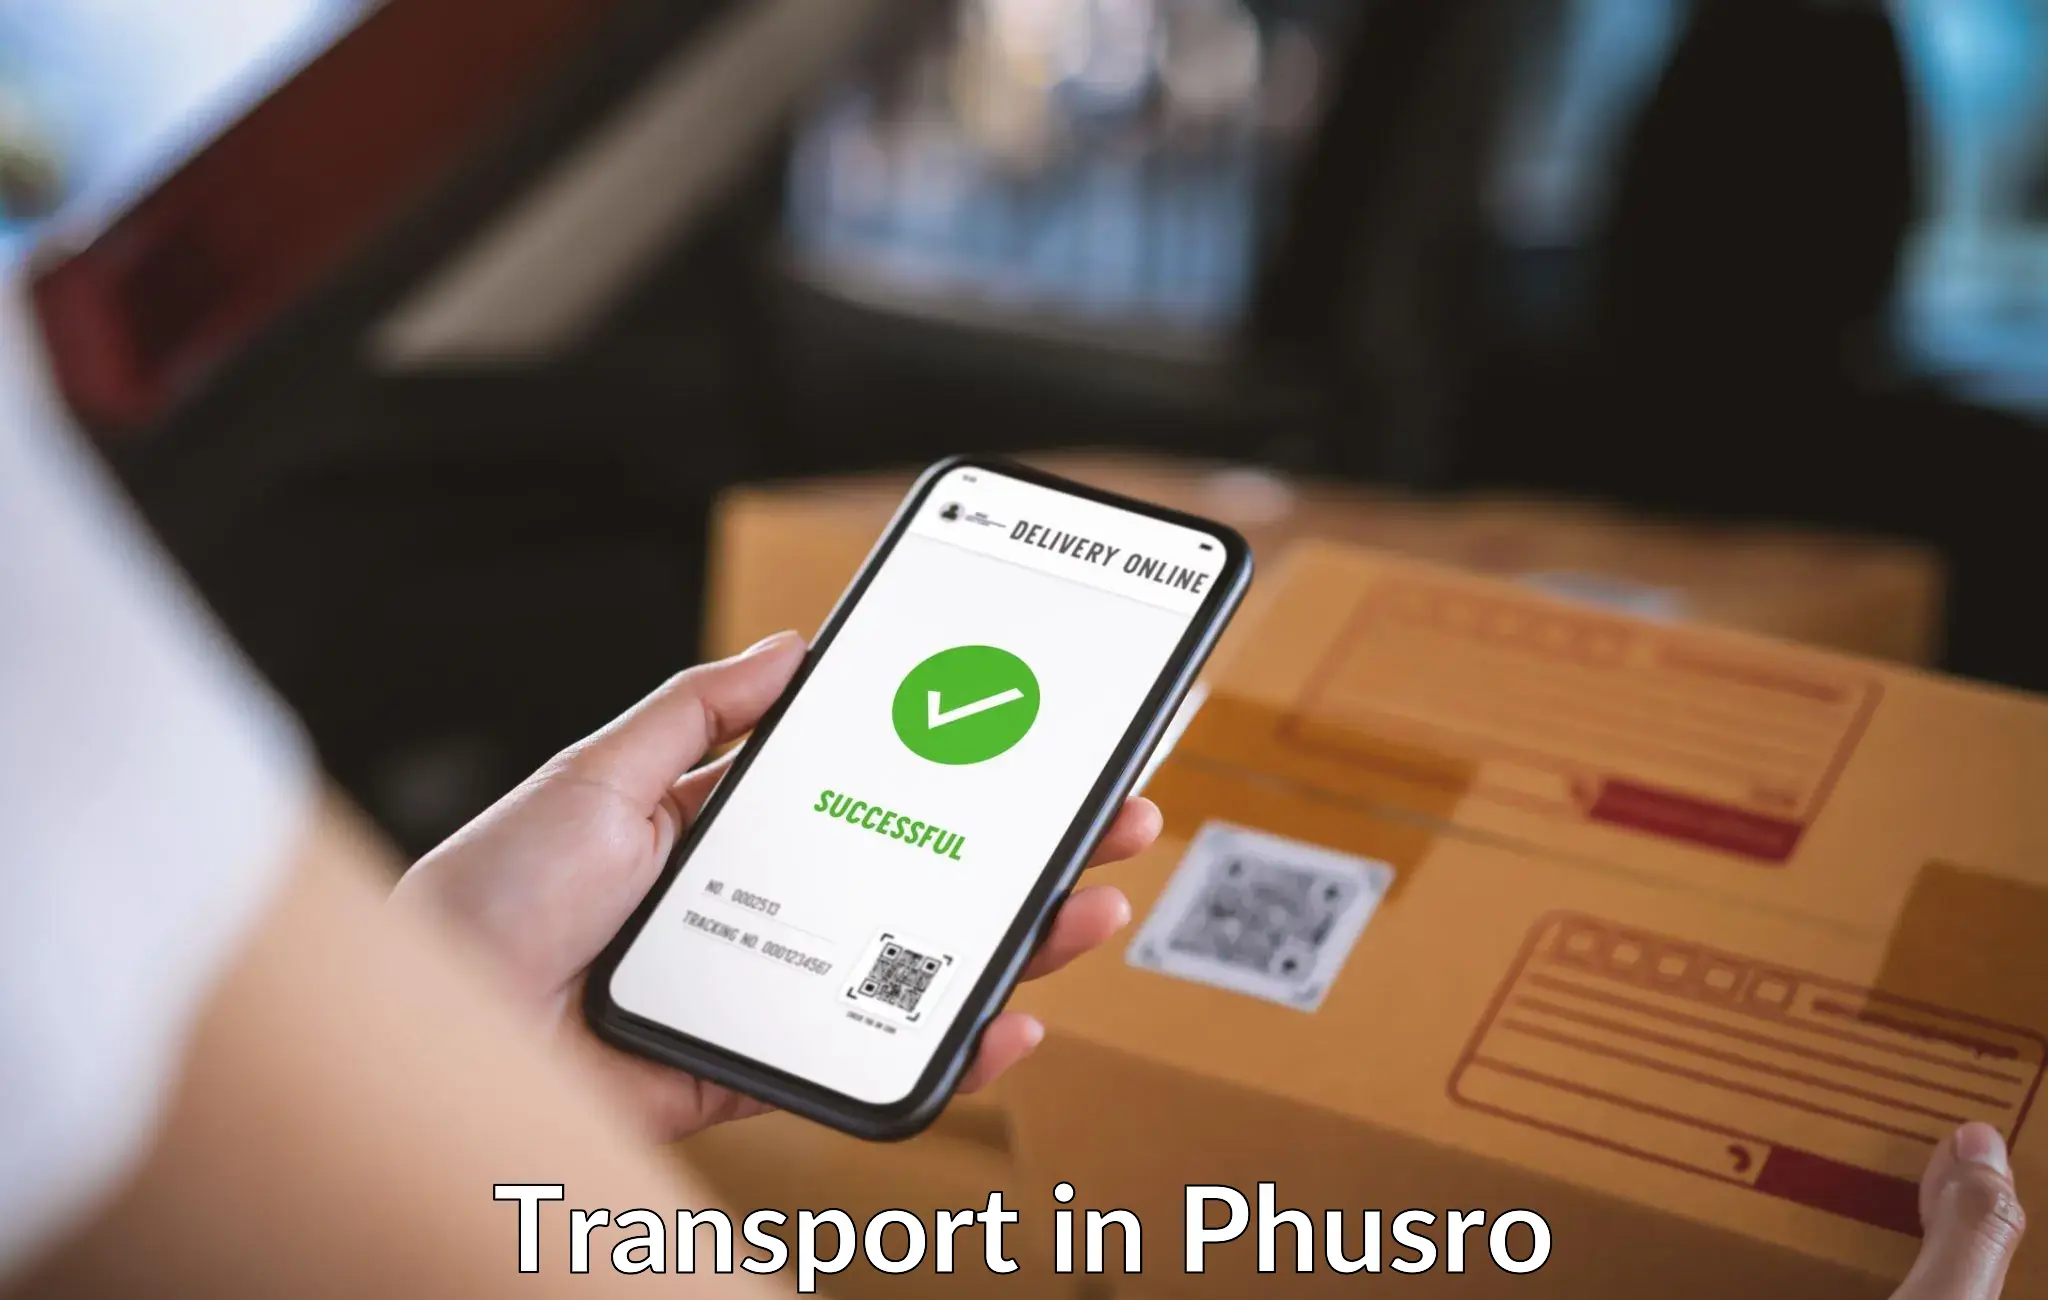 Transport shared services in Phusro